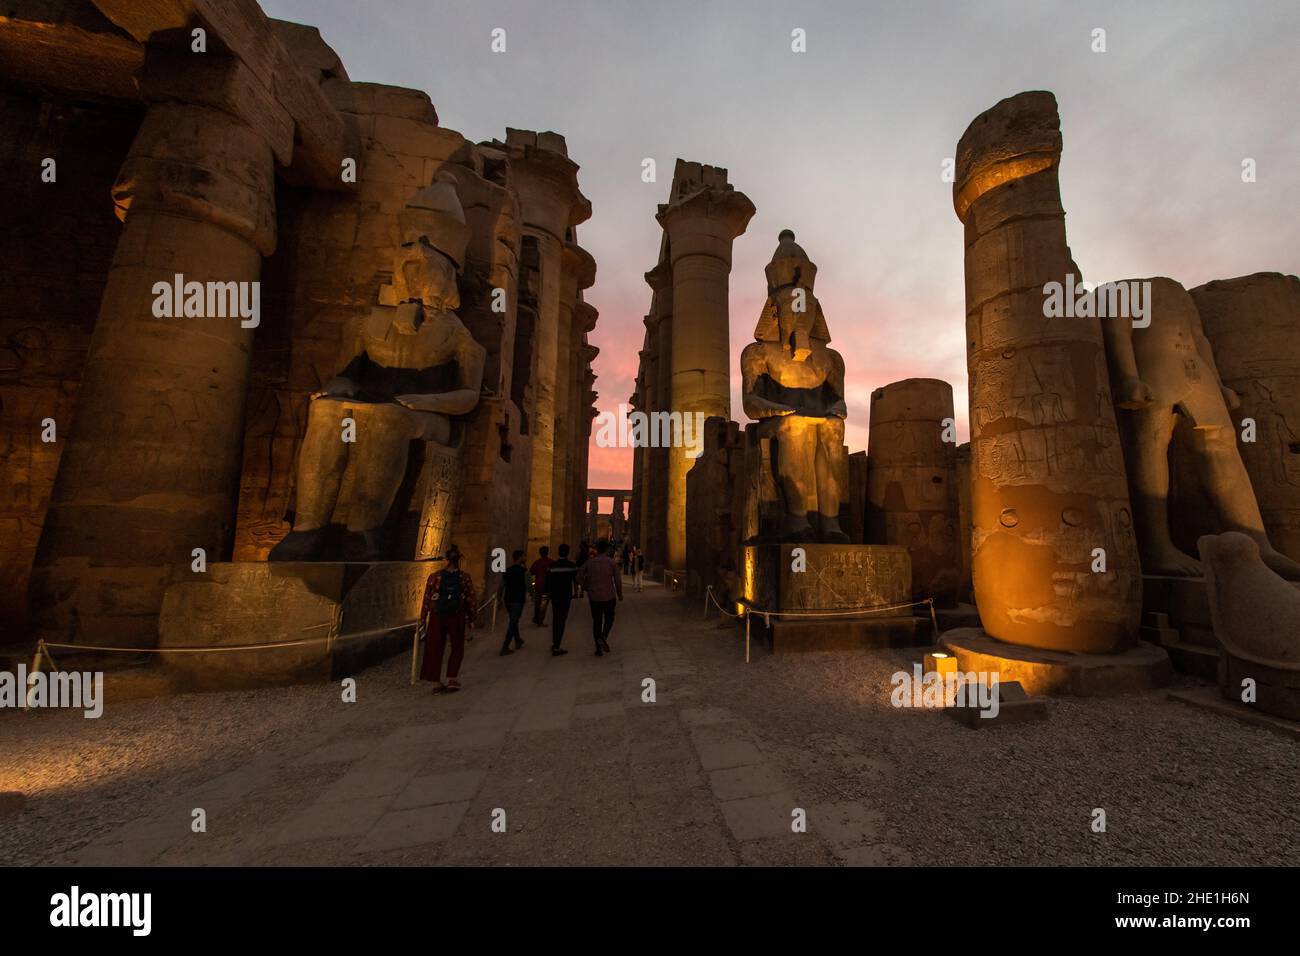 Statues and pillars at Luxor temple in Egypt illuminated by lights in the evening as darkness falls for a beautiful and dramatic effect. Stock Photo